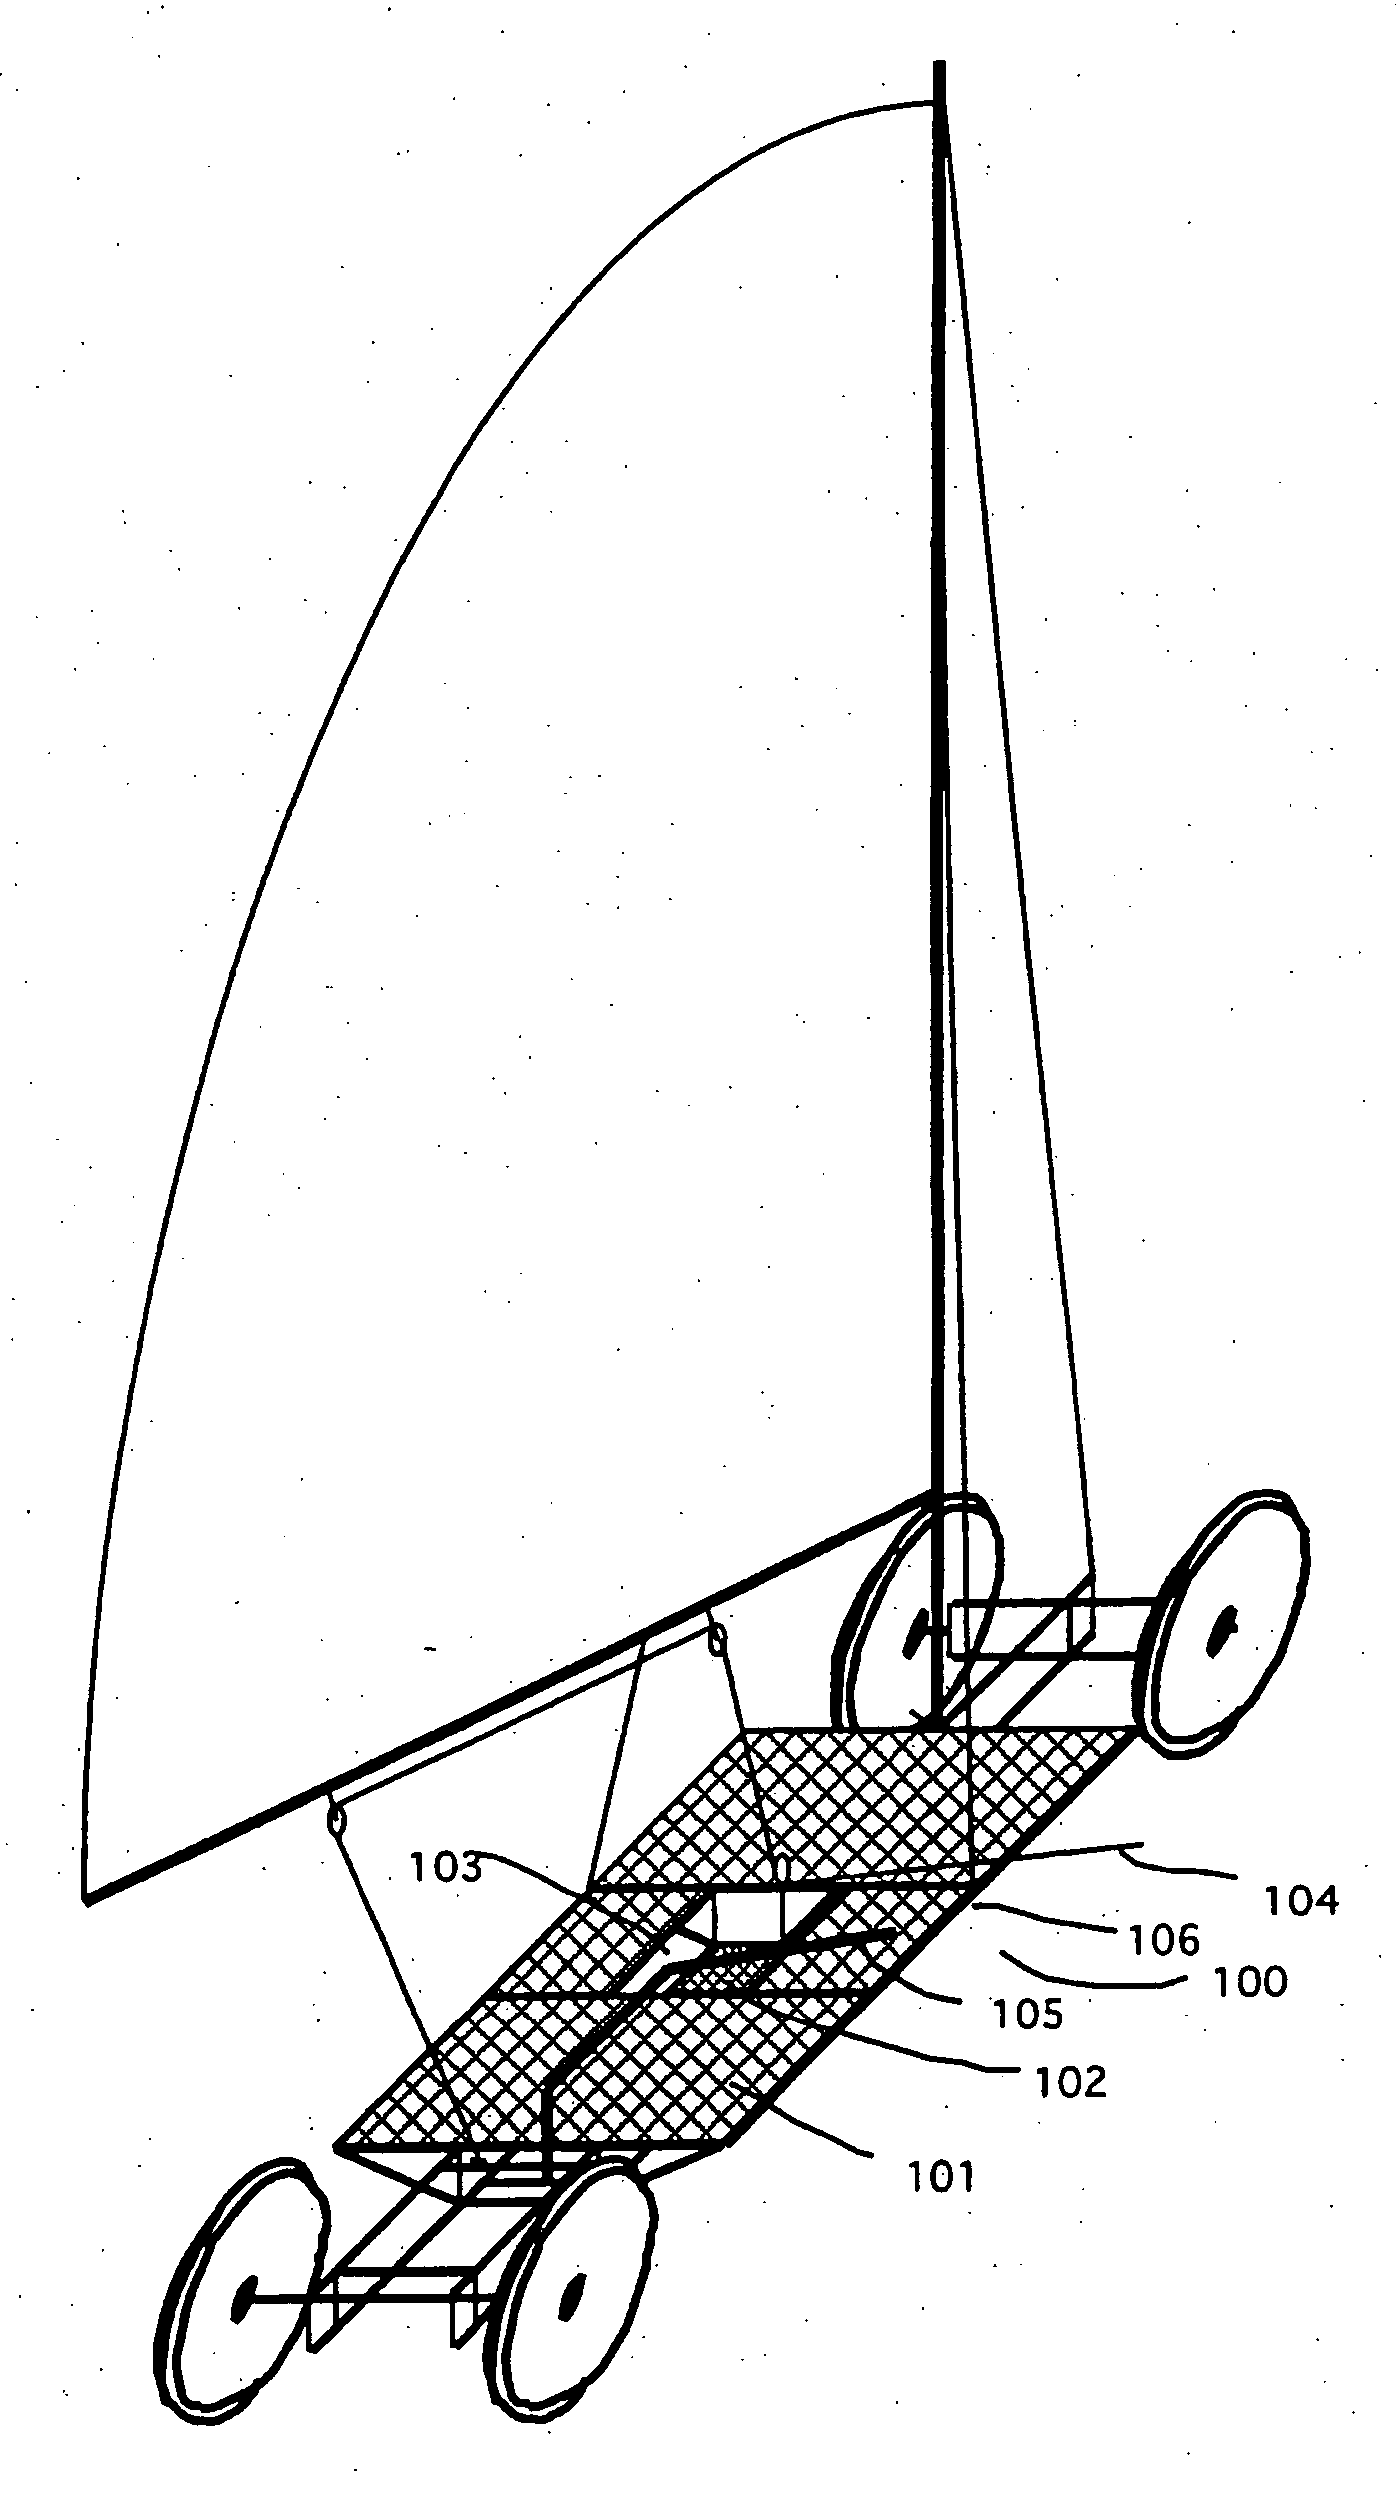 Sailing craft with wheels